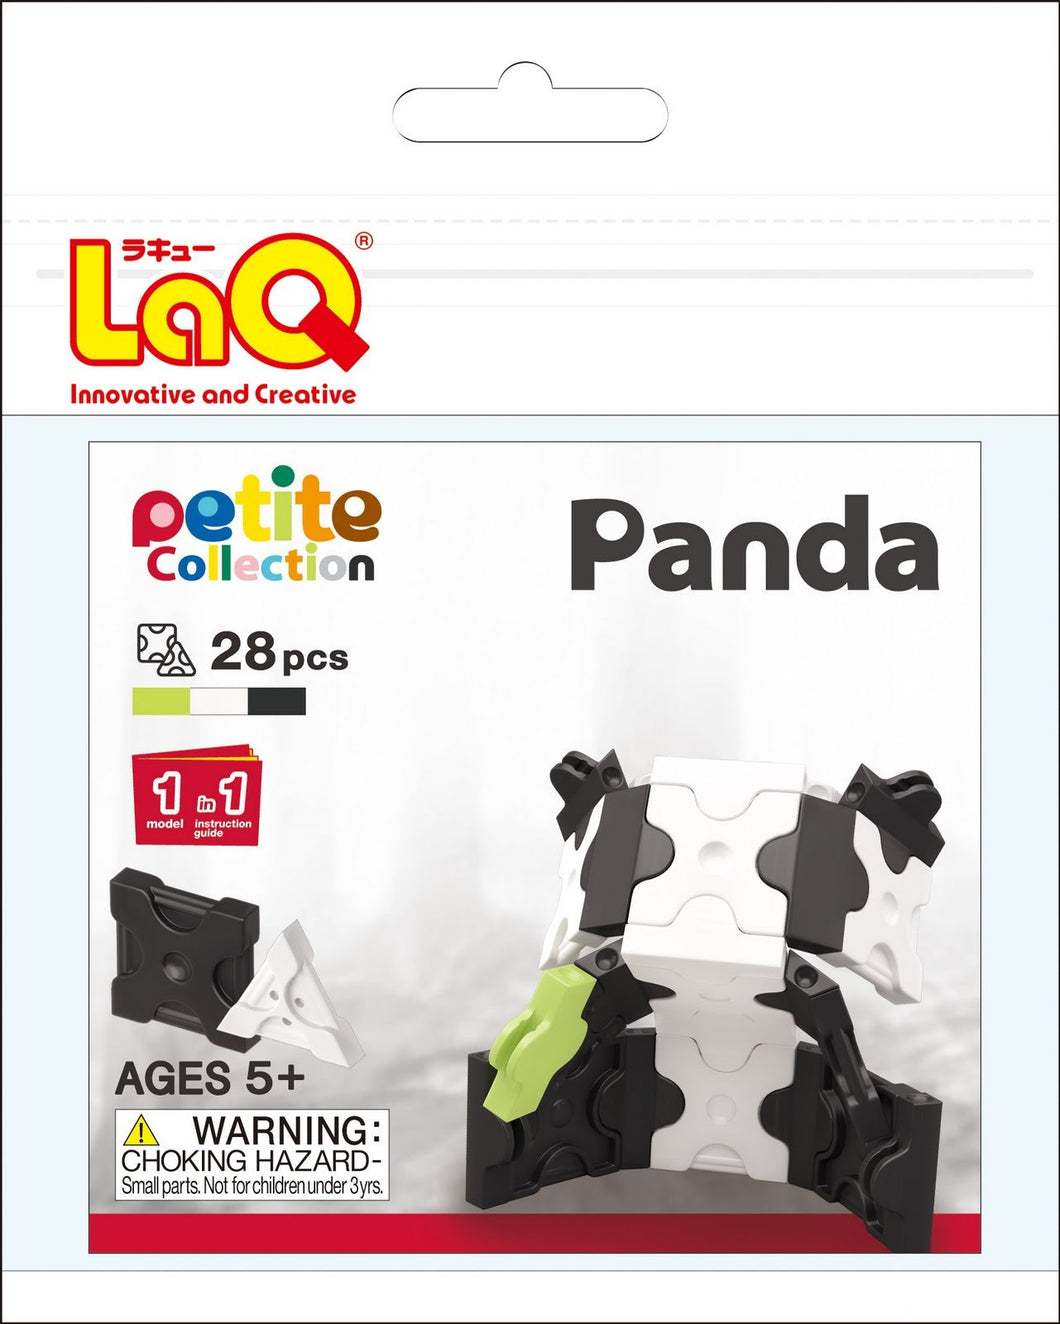 Panda set package featured in the LaQ petite set